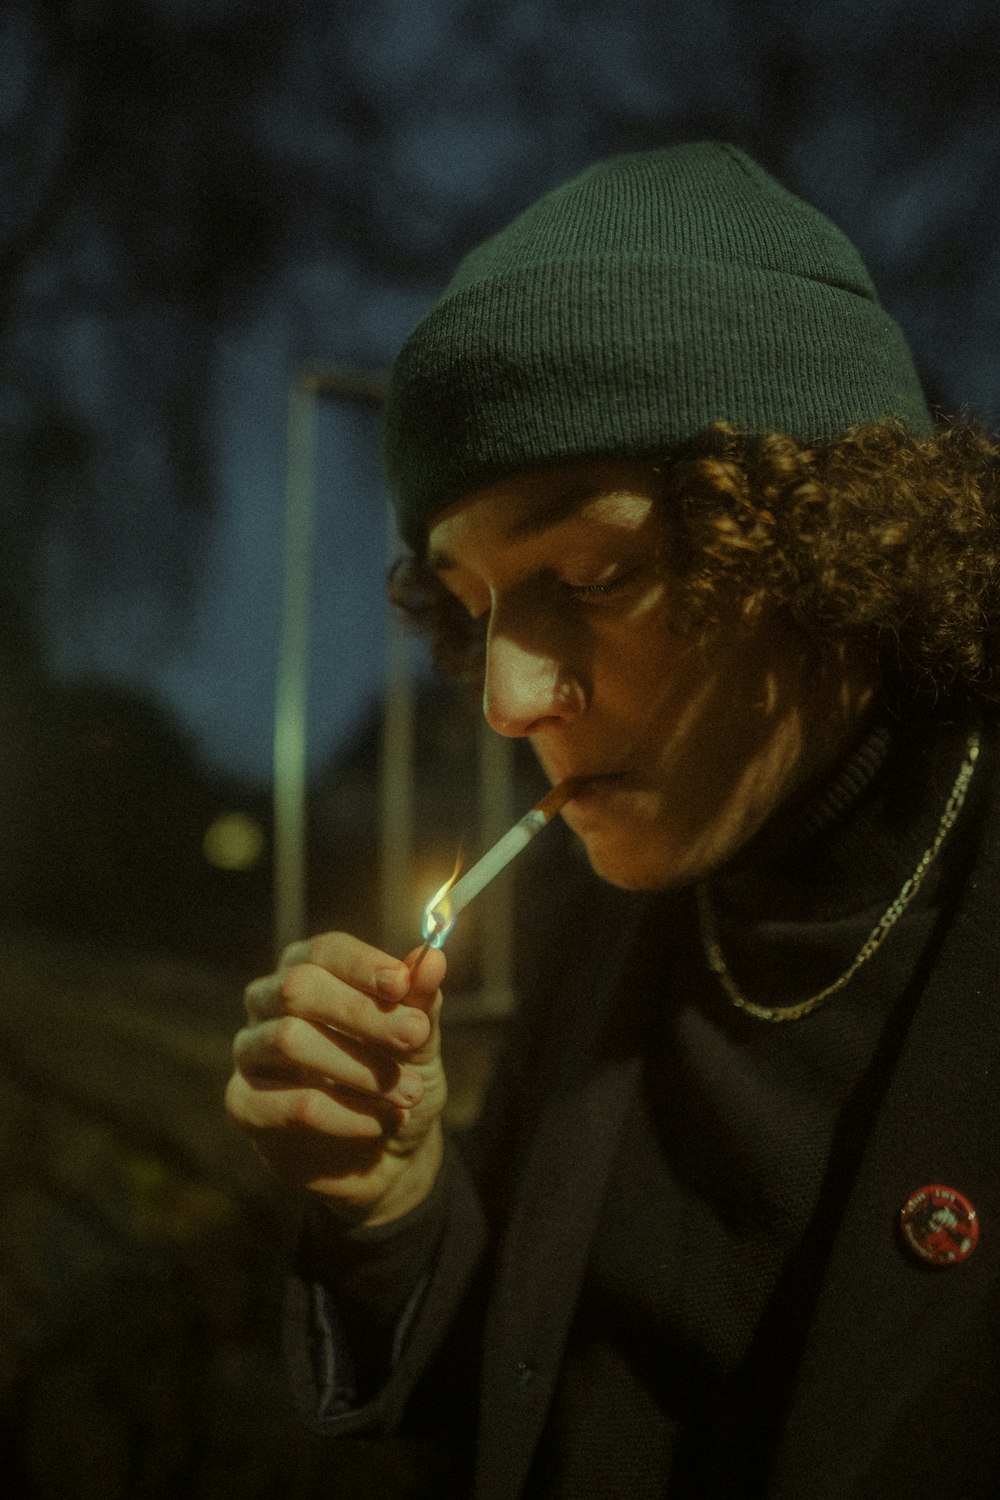 a man in a green hat lights a cigarette